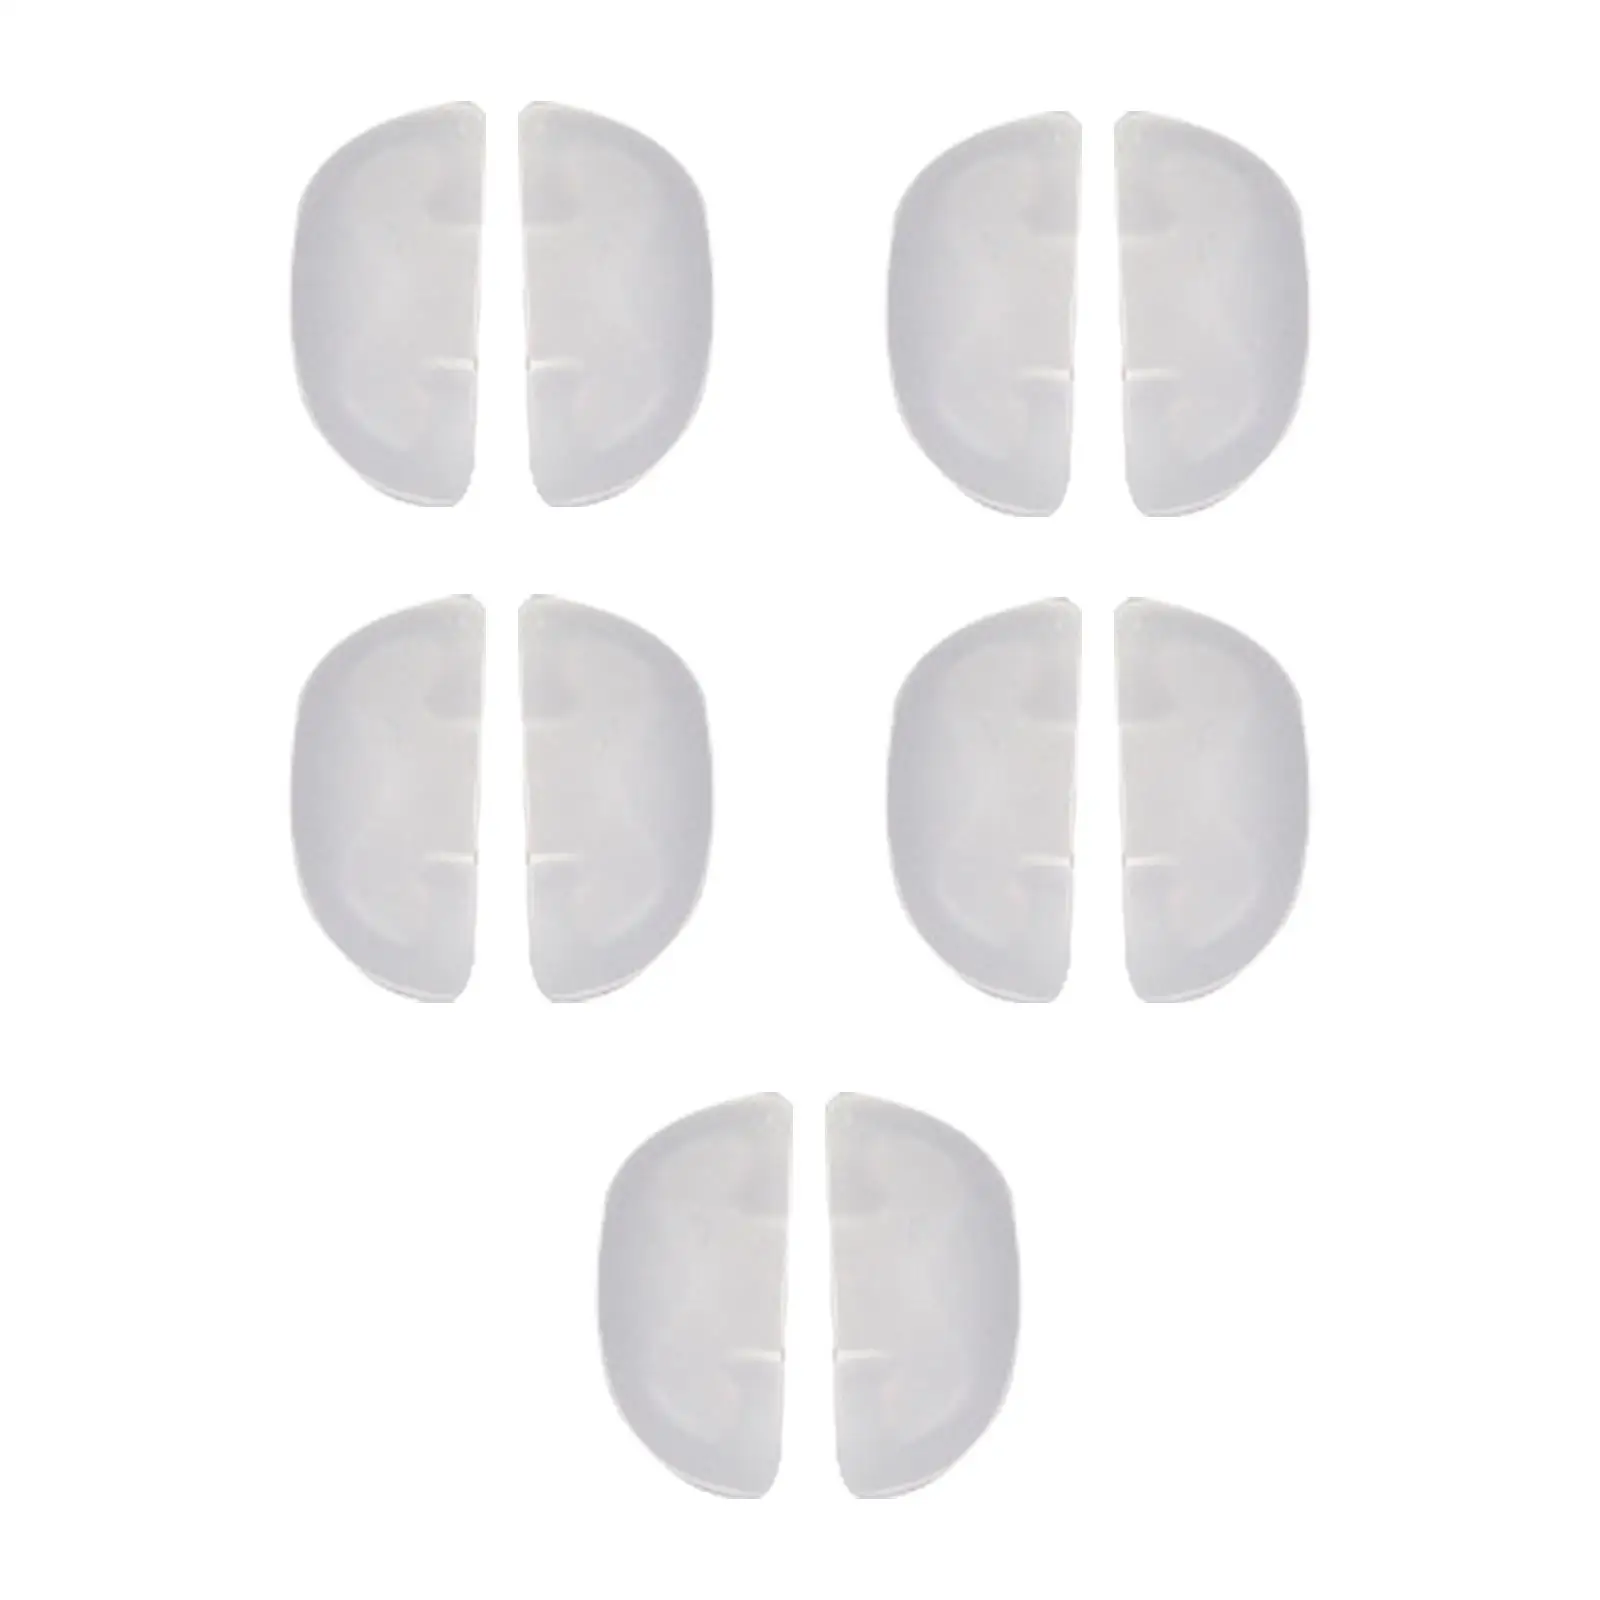 10Pcs Kids Eyeglass Nose Pads Replacement Parts Anti Slip Slide/Push in for Sunglasses